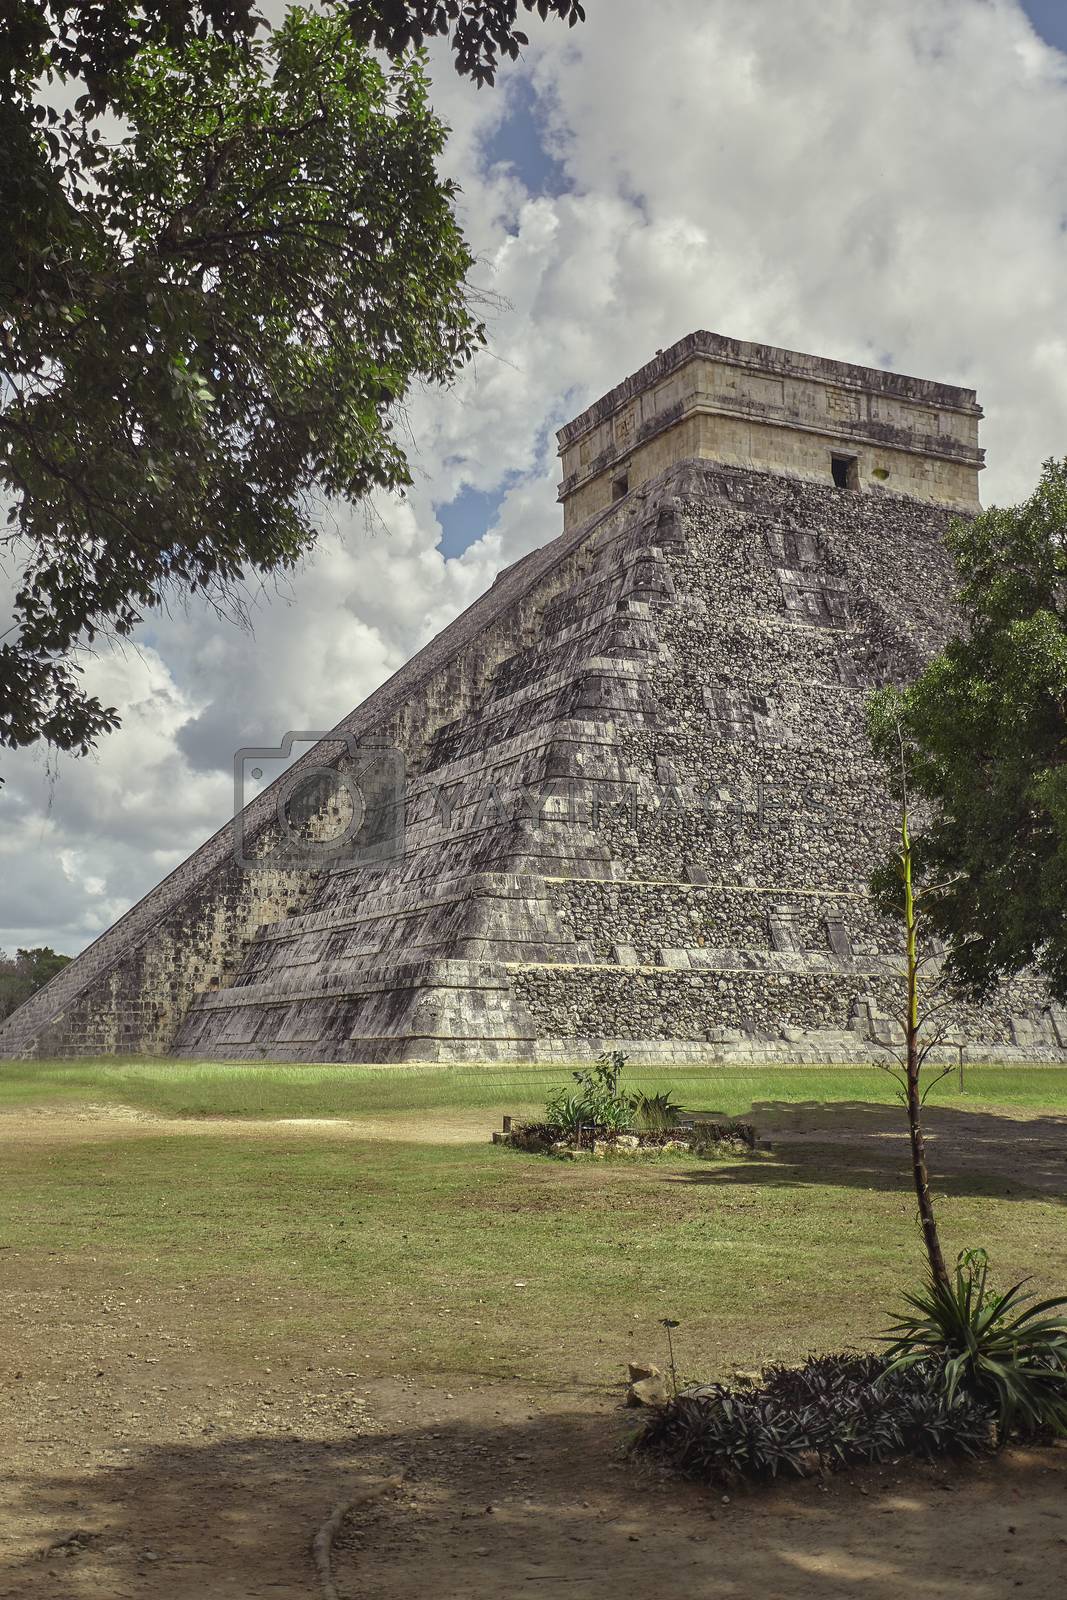 Royalty free image of Pyramid of Chichen Itza vertical shot by pippocarlot